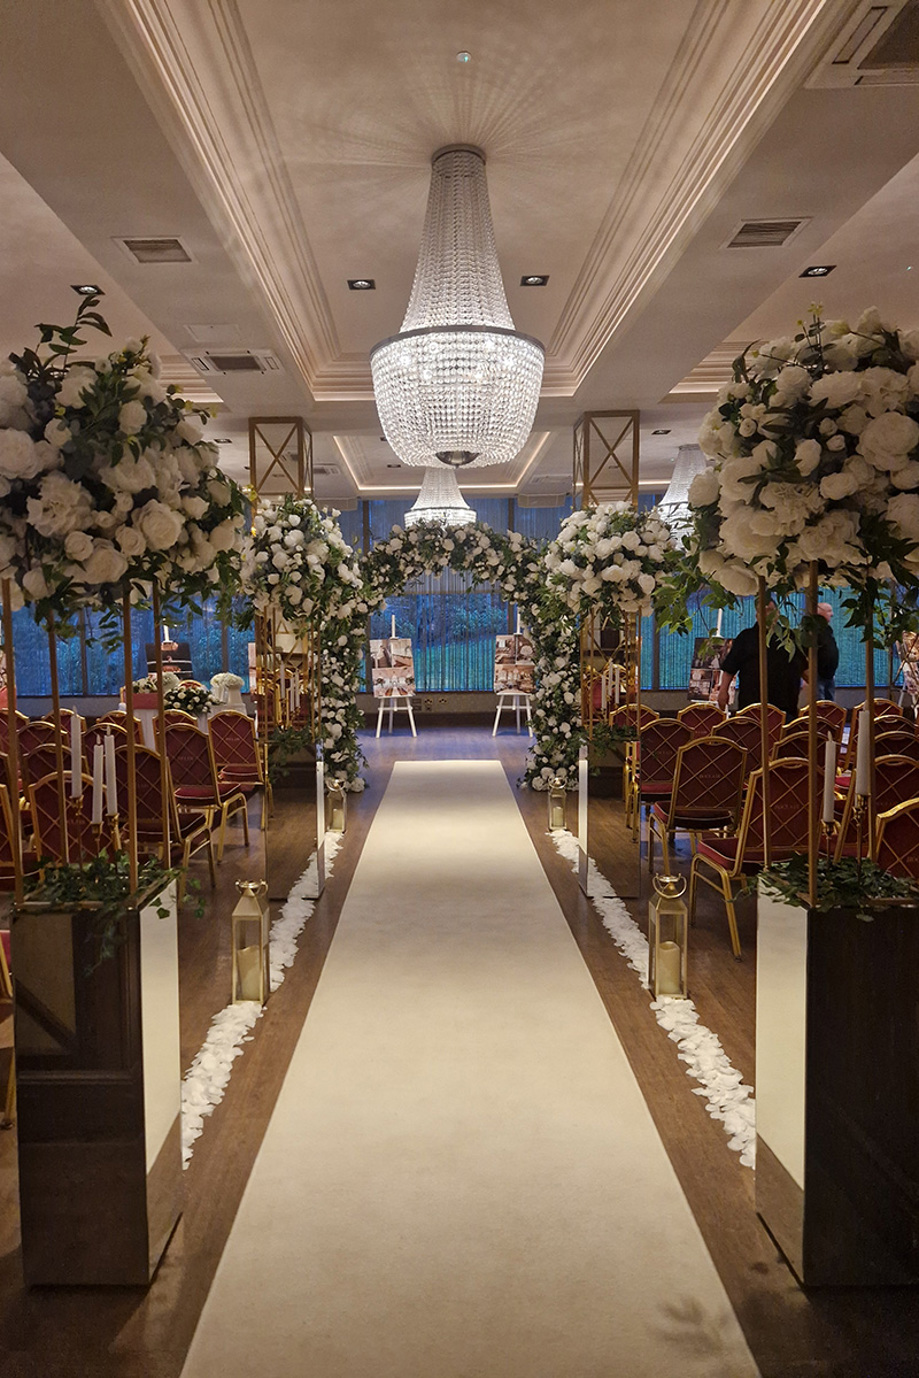 Ceremony aisle decorated with candles, lanterns and floral-topped mirrored pillar boxes